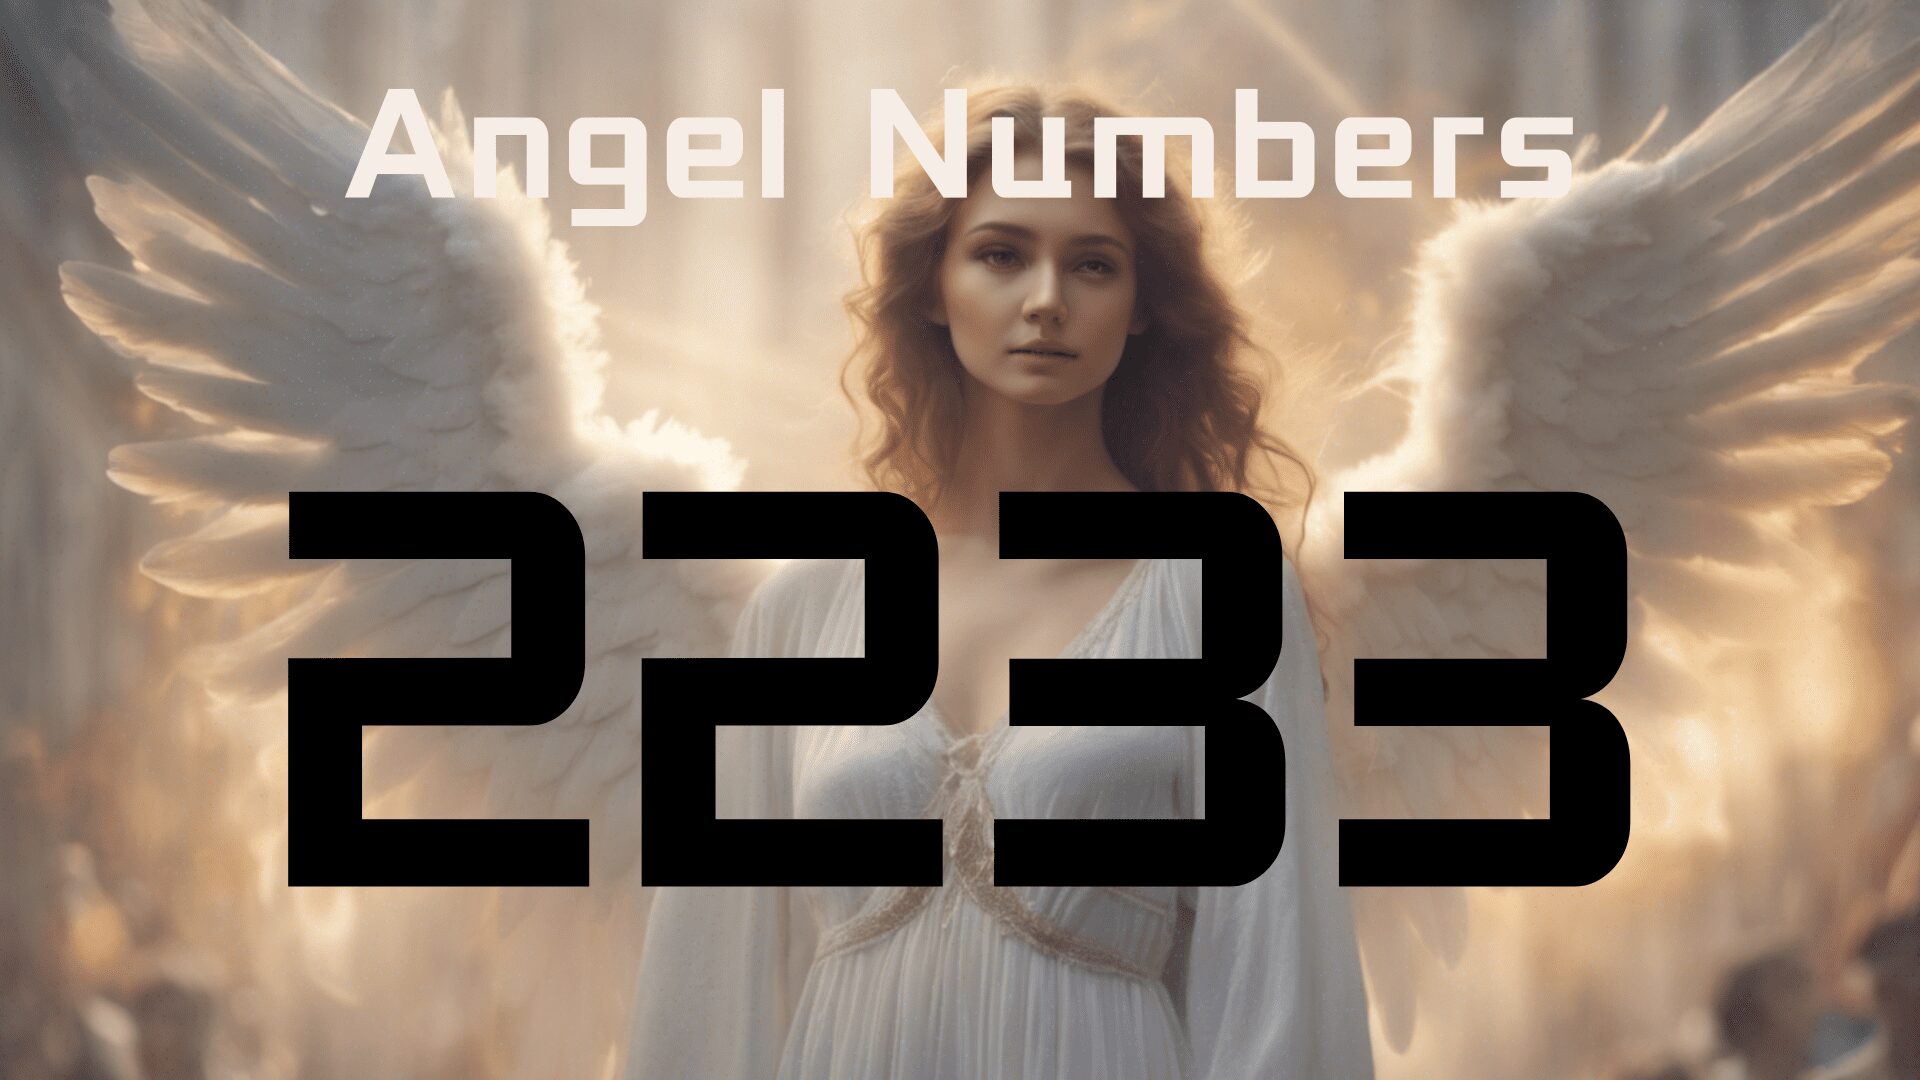 Spiritual Meaning Of Angel Number 2233